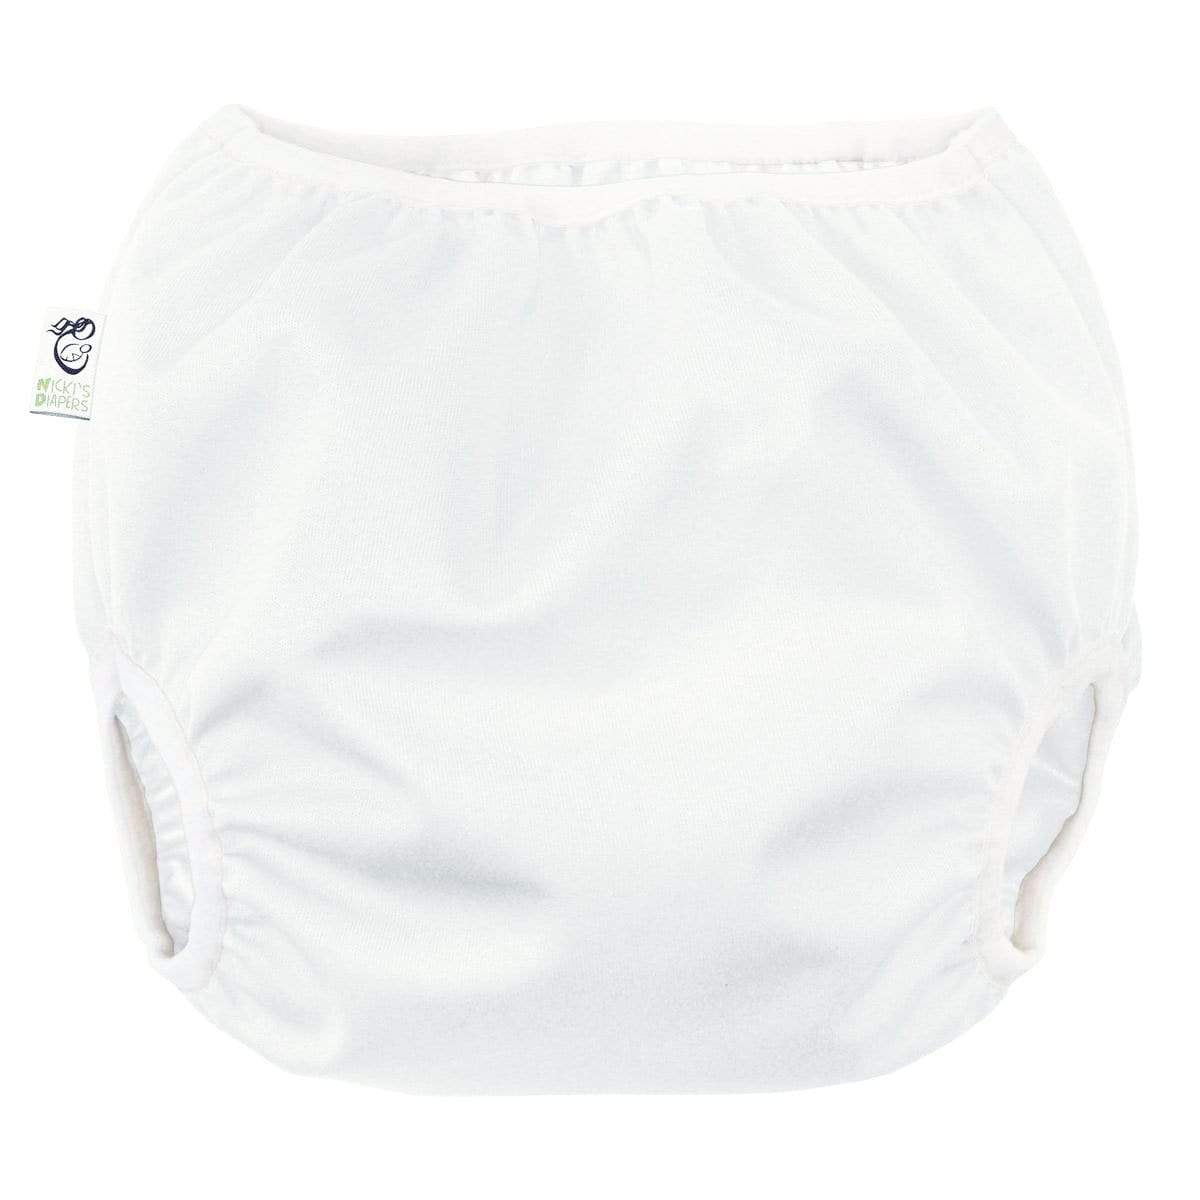 Nicki's Diapers Pull-On Diaper Cover